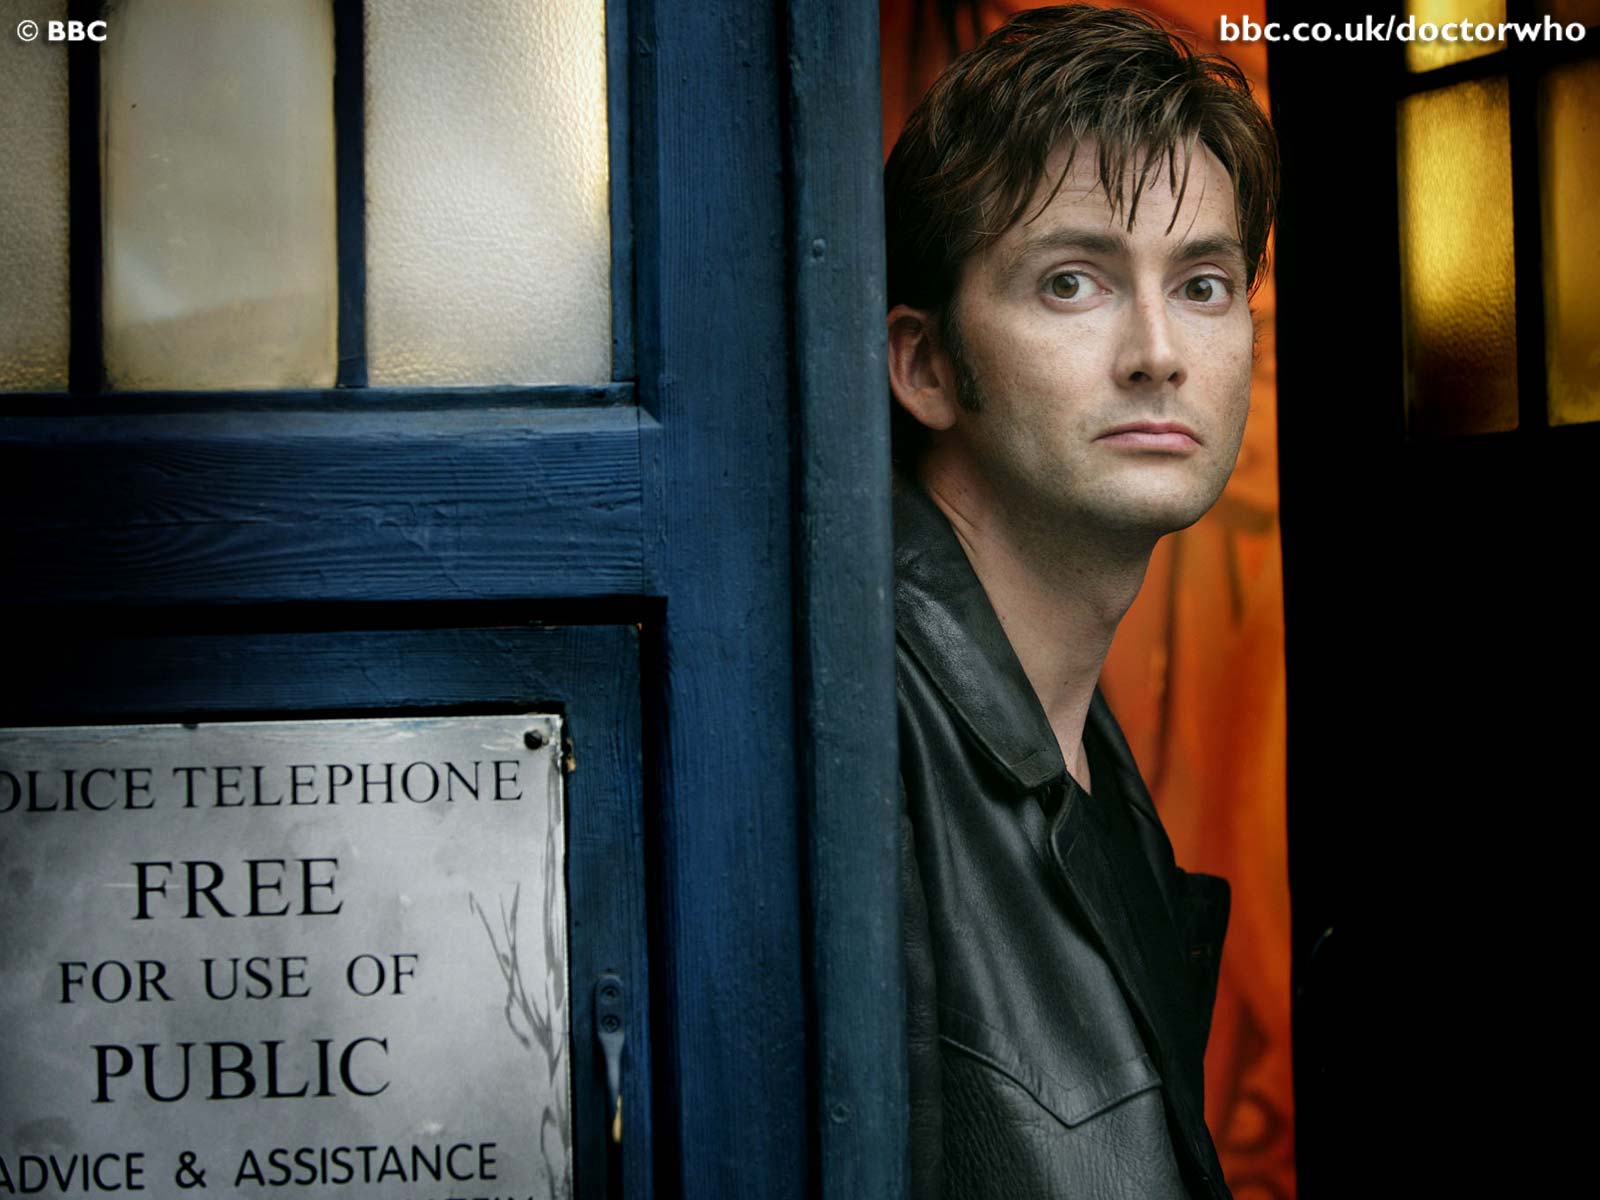 Down The Rabbit Hole: A Companion's Guide: The 10th Doctor